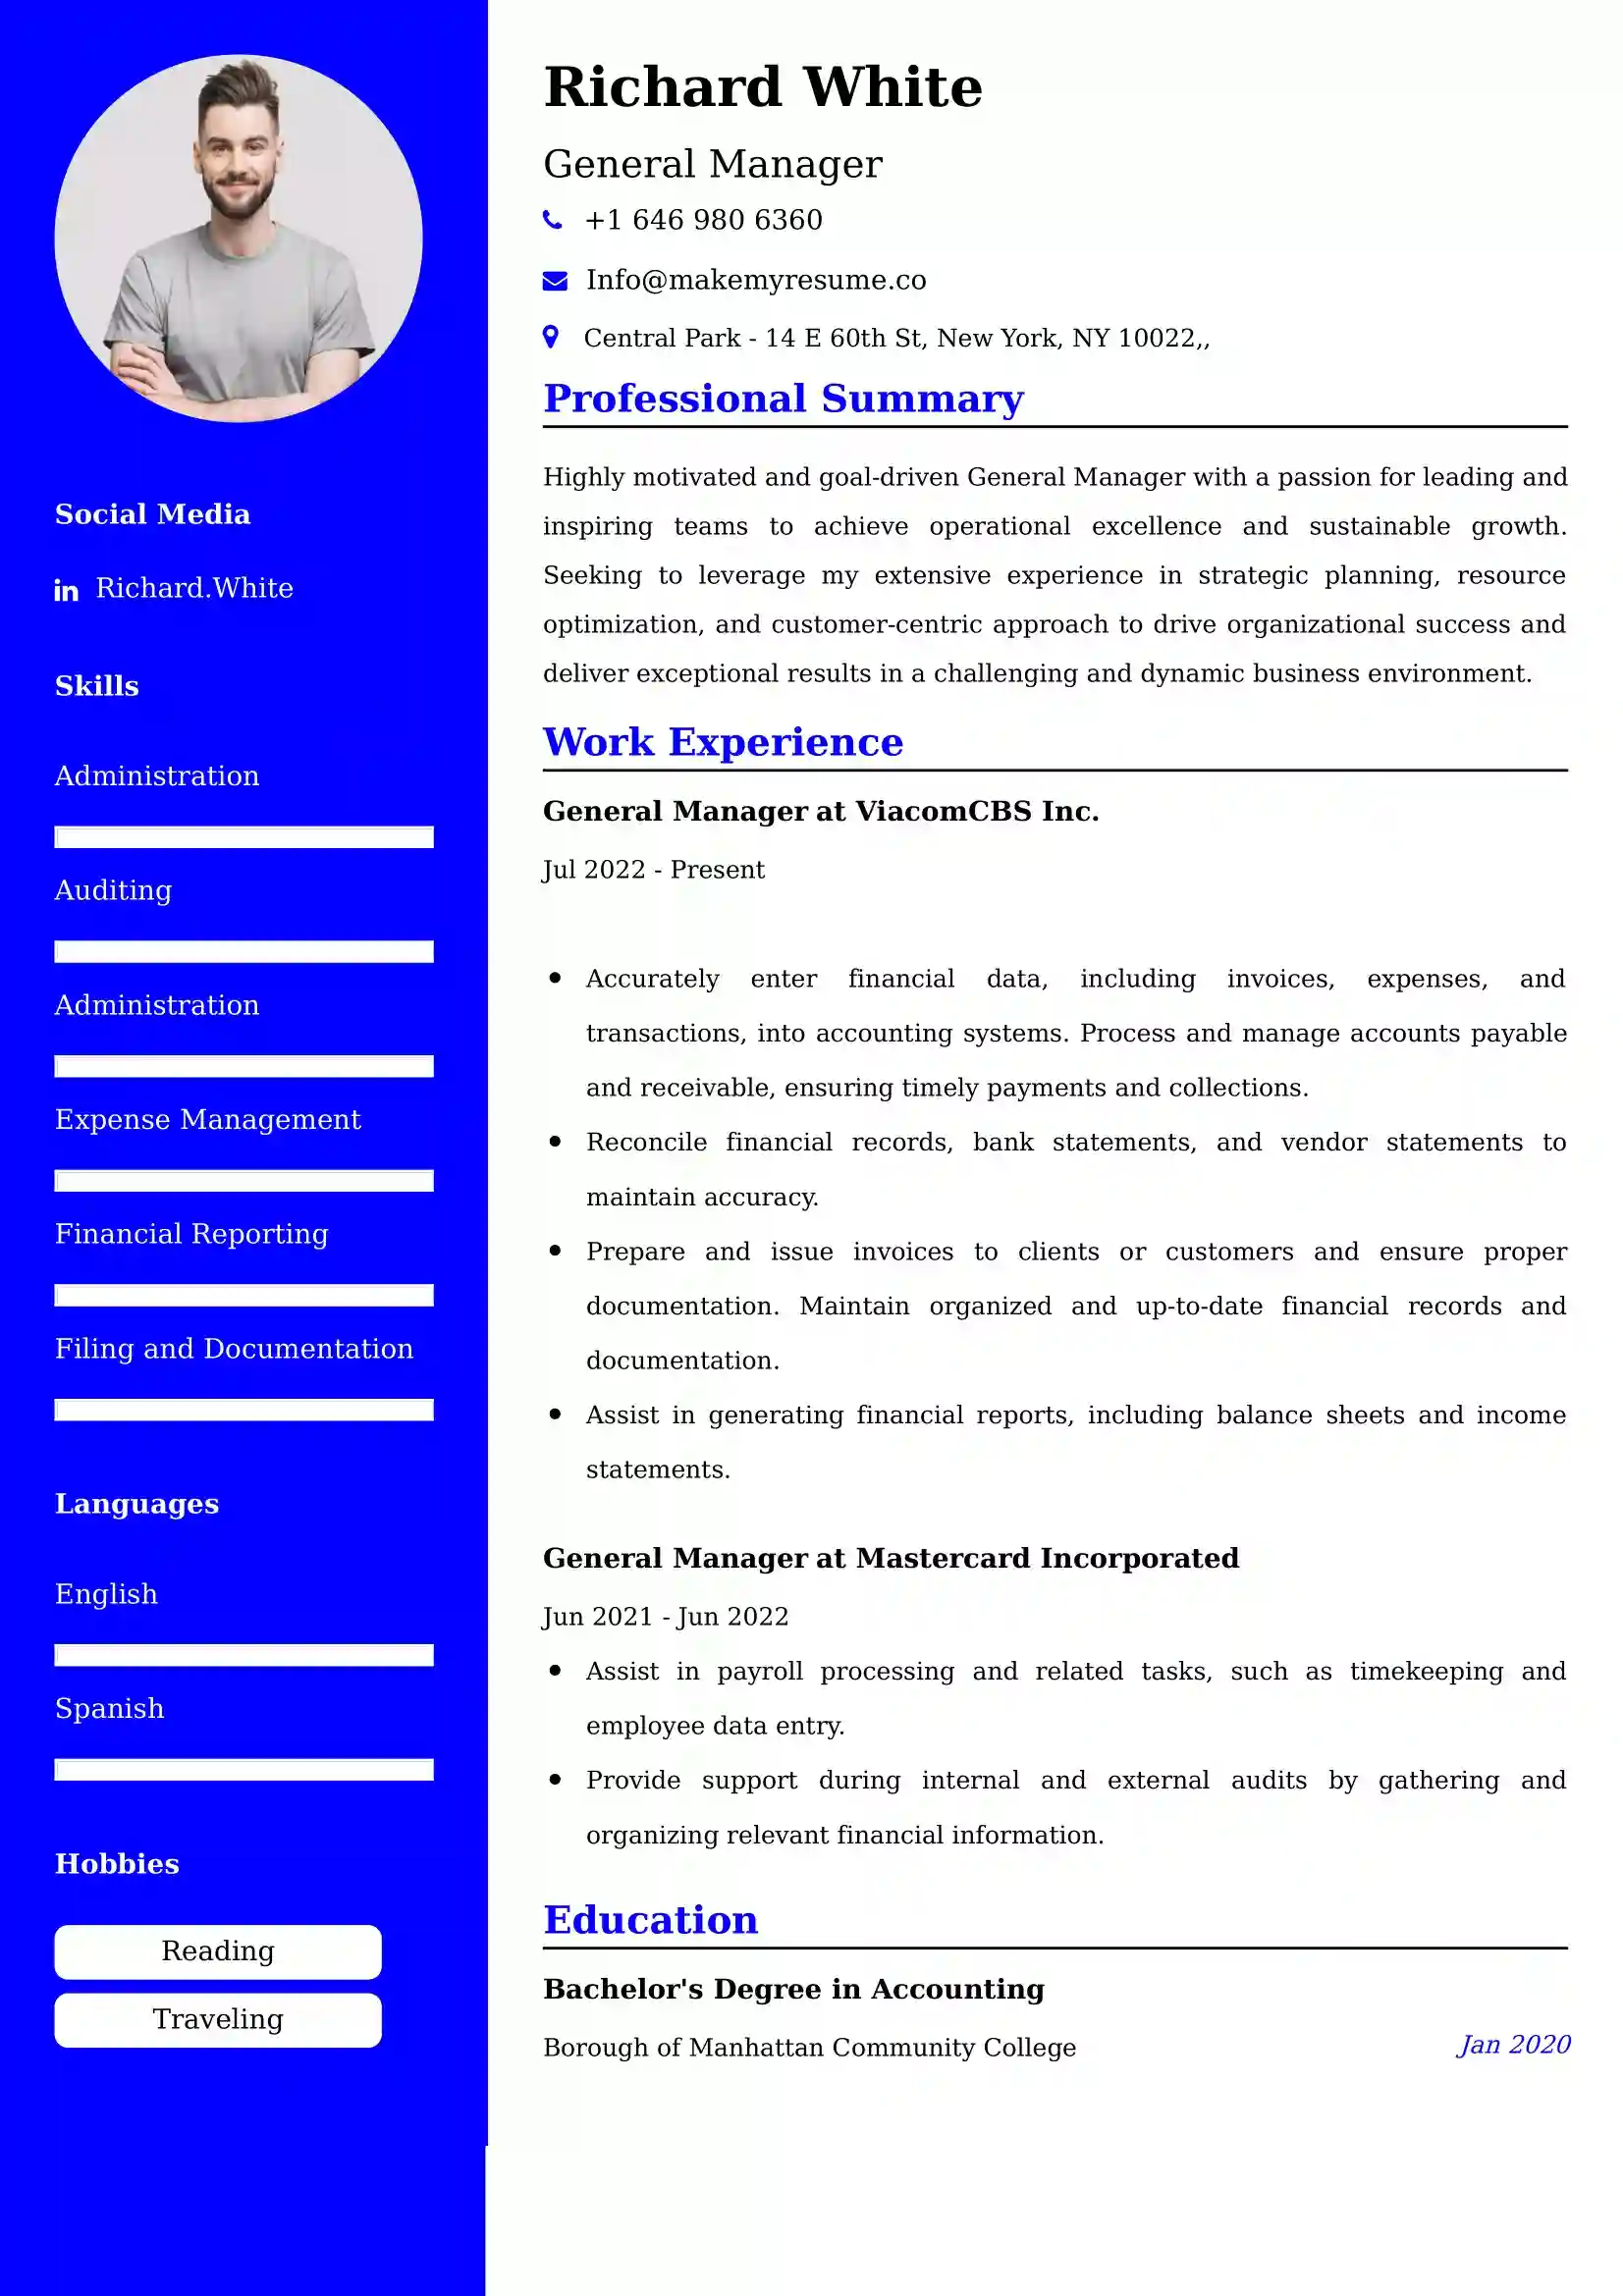 General Manager Resume Examples - UK Format, Latest Template.